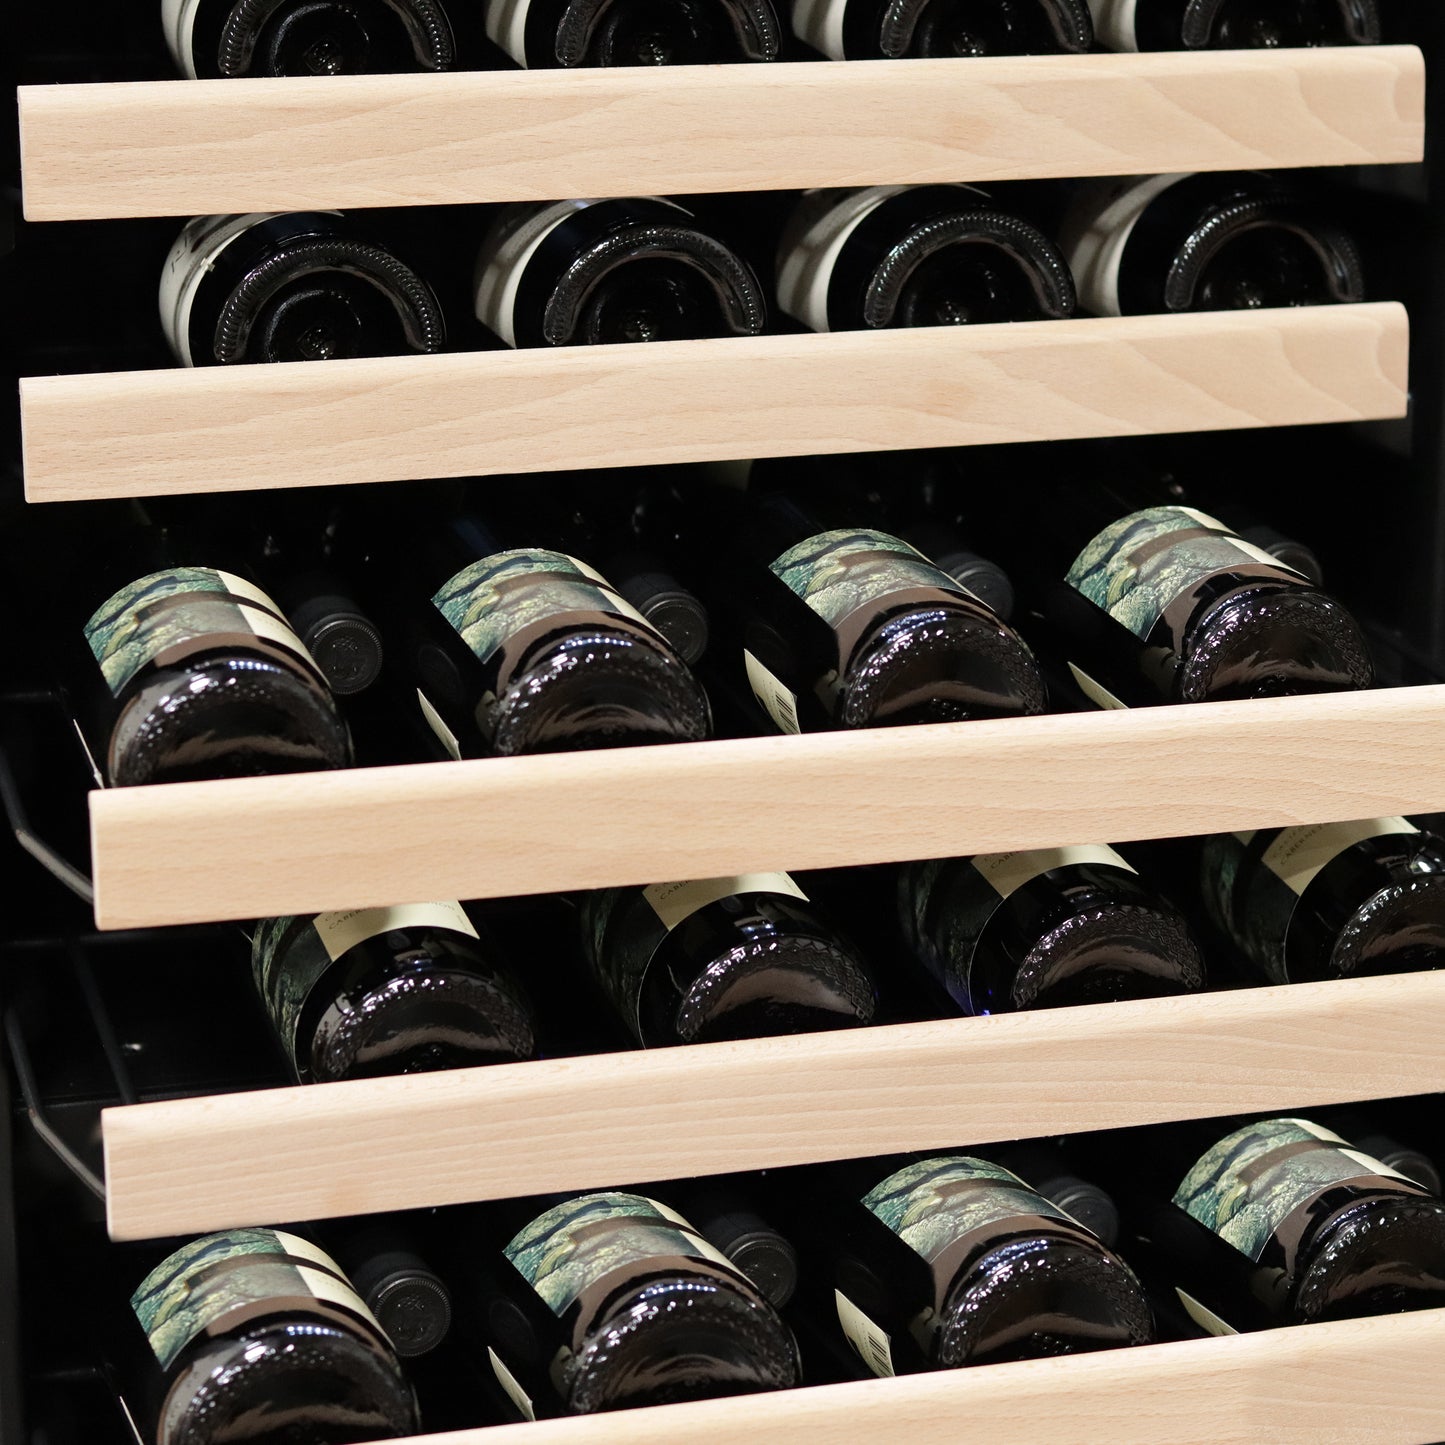 a wine rack with bottles of wine on display in a stainless steel dual zone compressor wine refrigerator